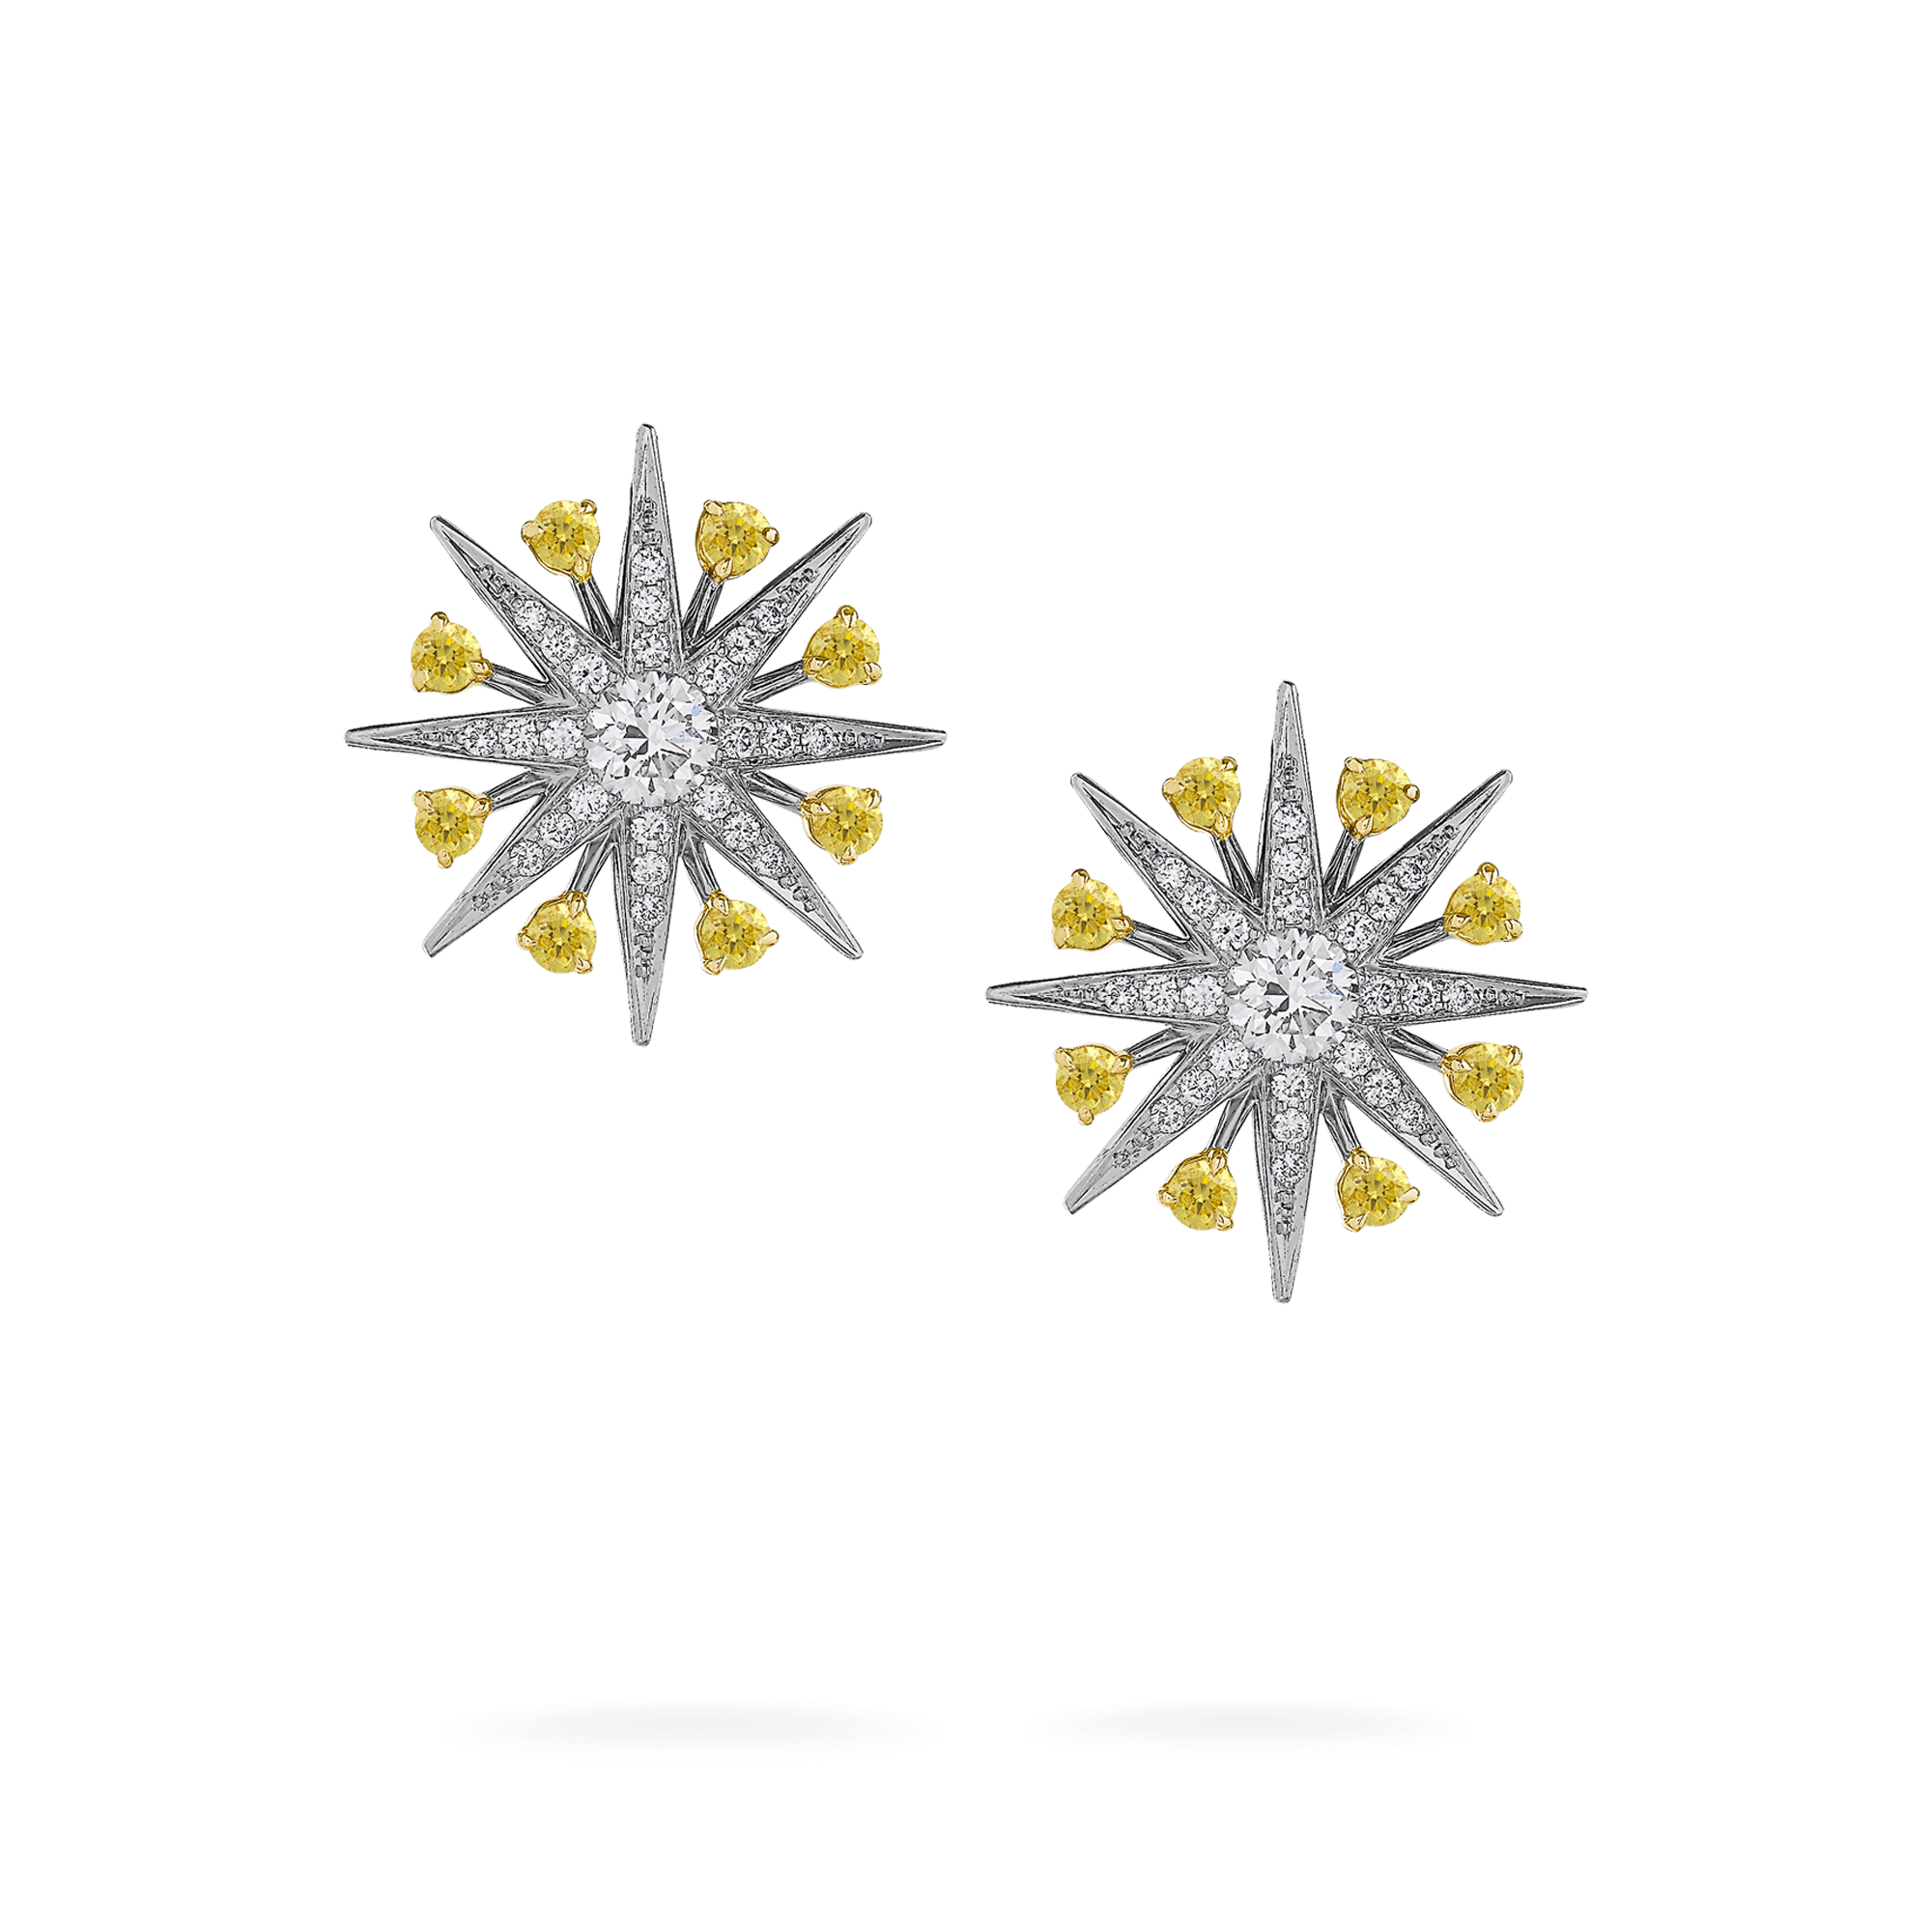 Garrard Starlight Jewellery Collection White and Yellow Diamond Stud Earrings In 18ct White and Yellow Gold 2016273